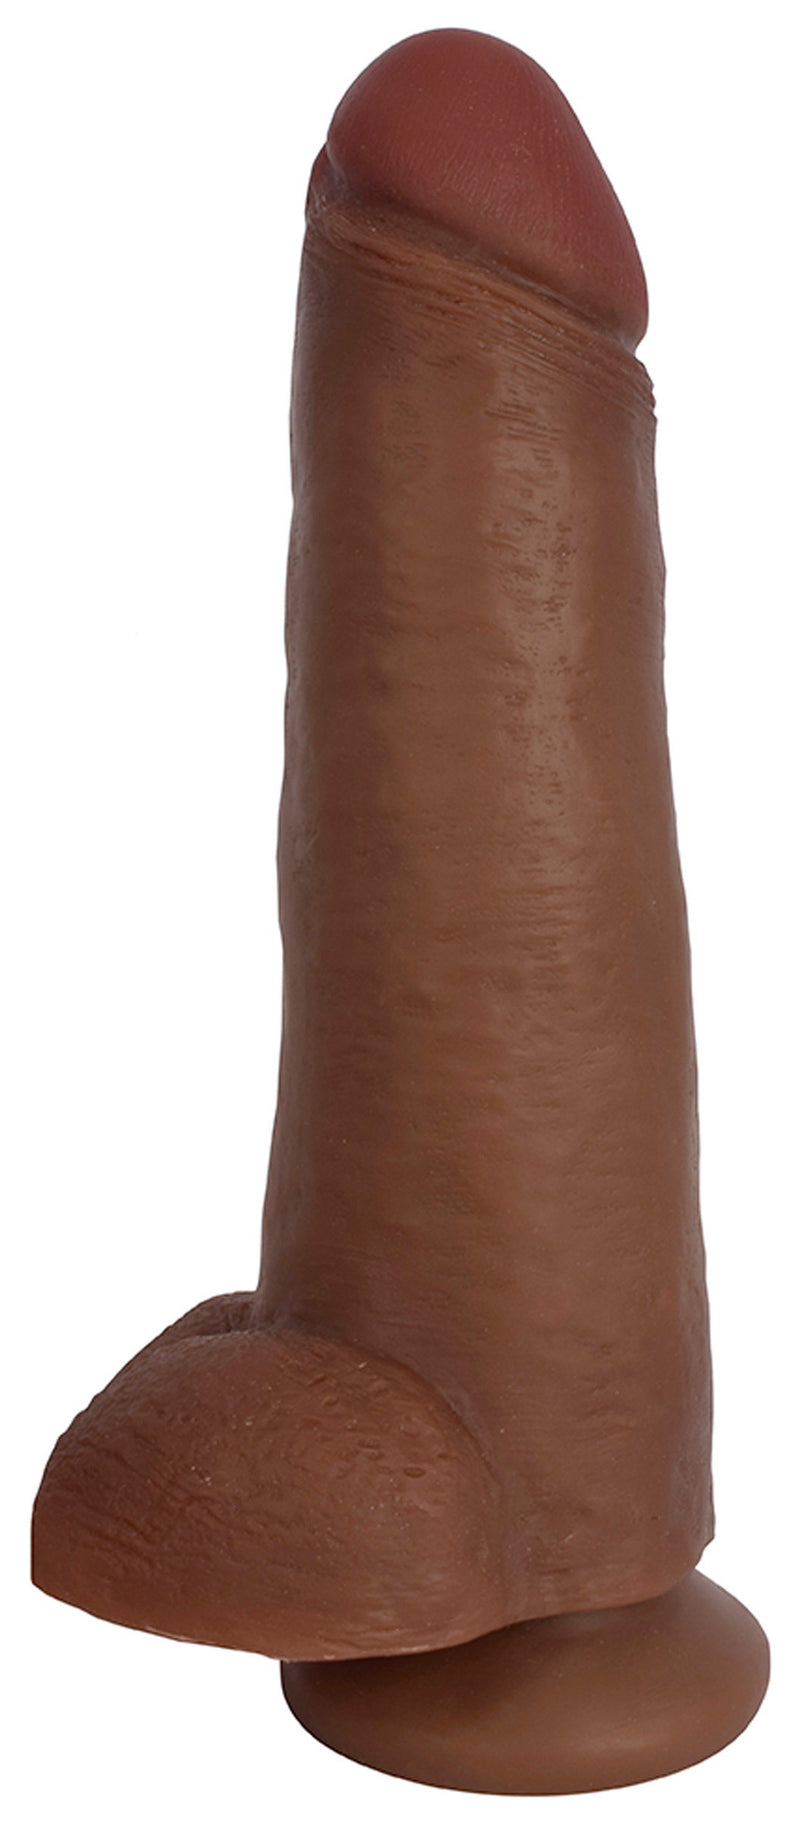 JOCK 12 Inch Dong with Balls Brown Dildos from Jock